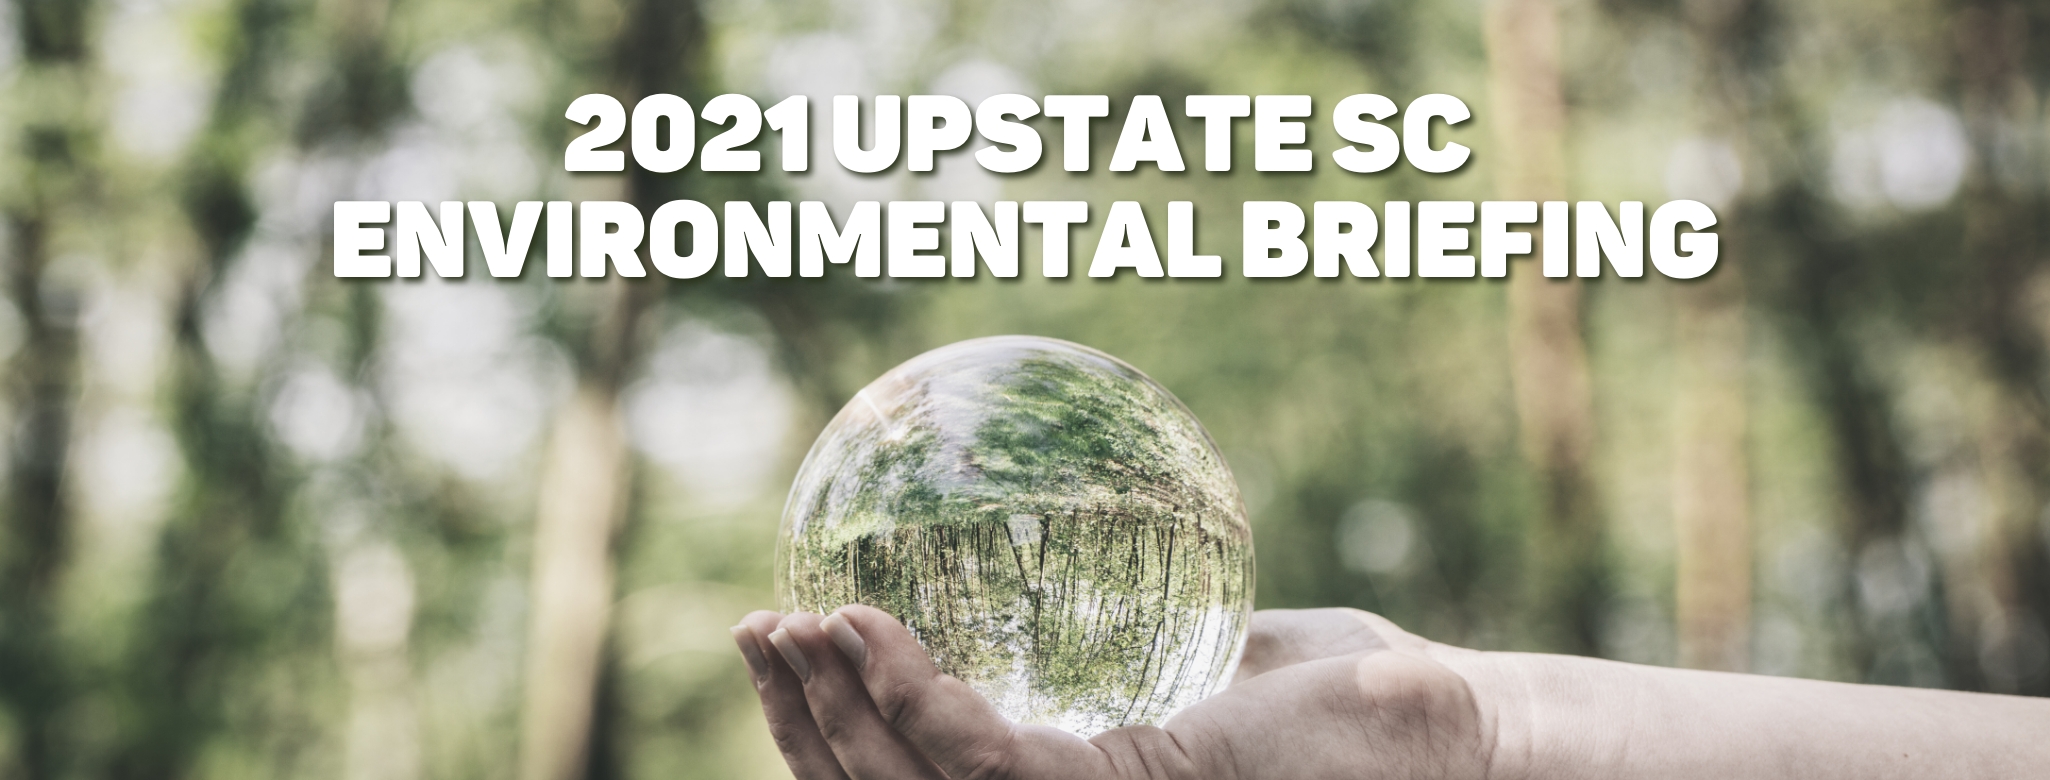 2021 Upstate SC Environmental Briefing cover image